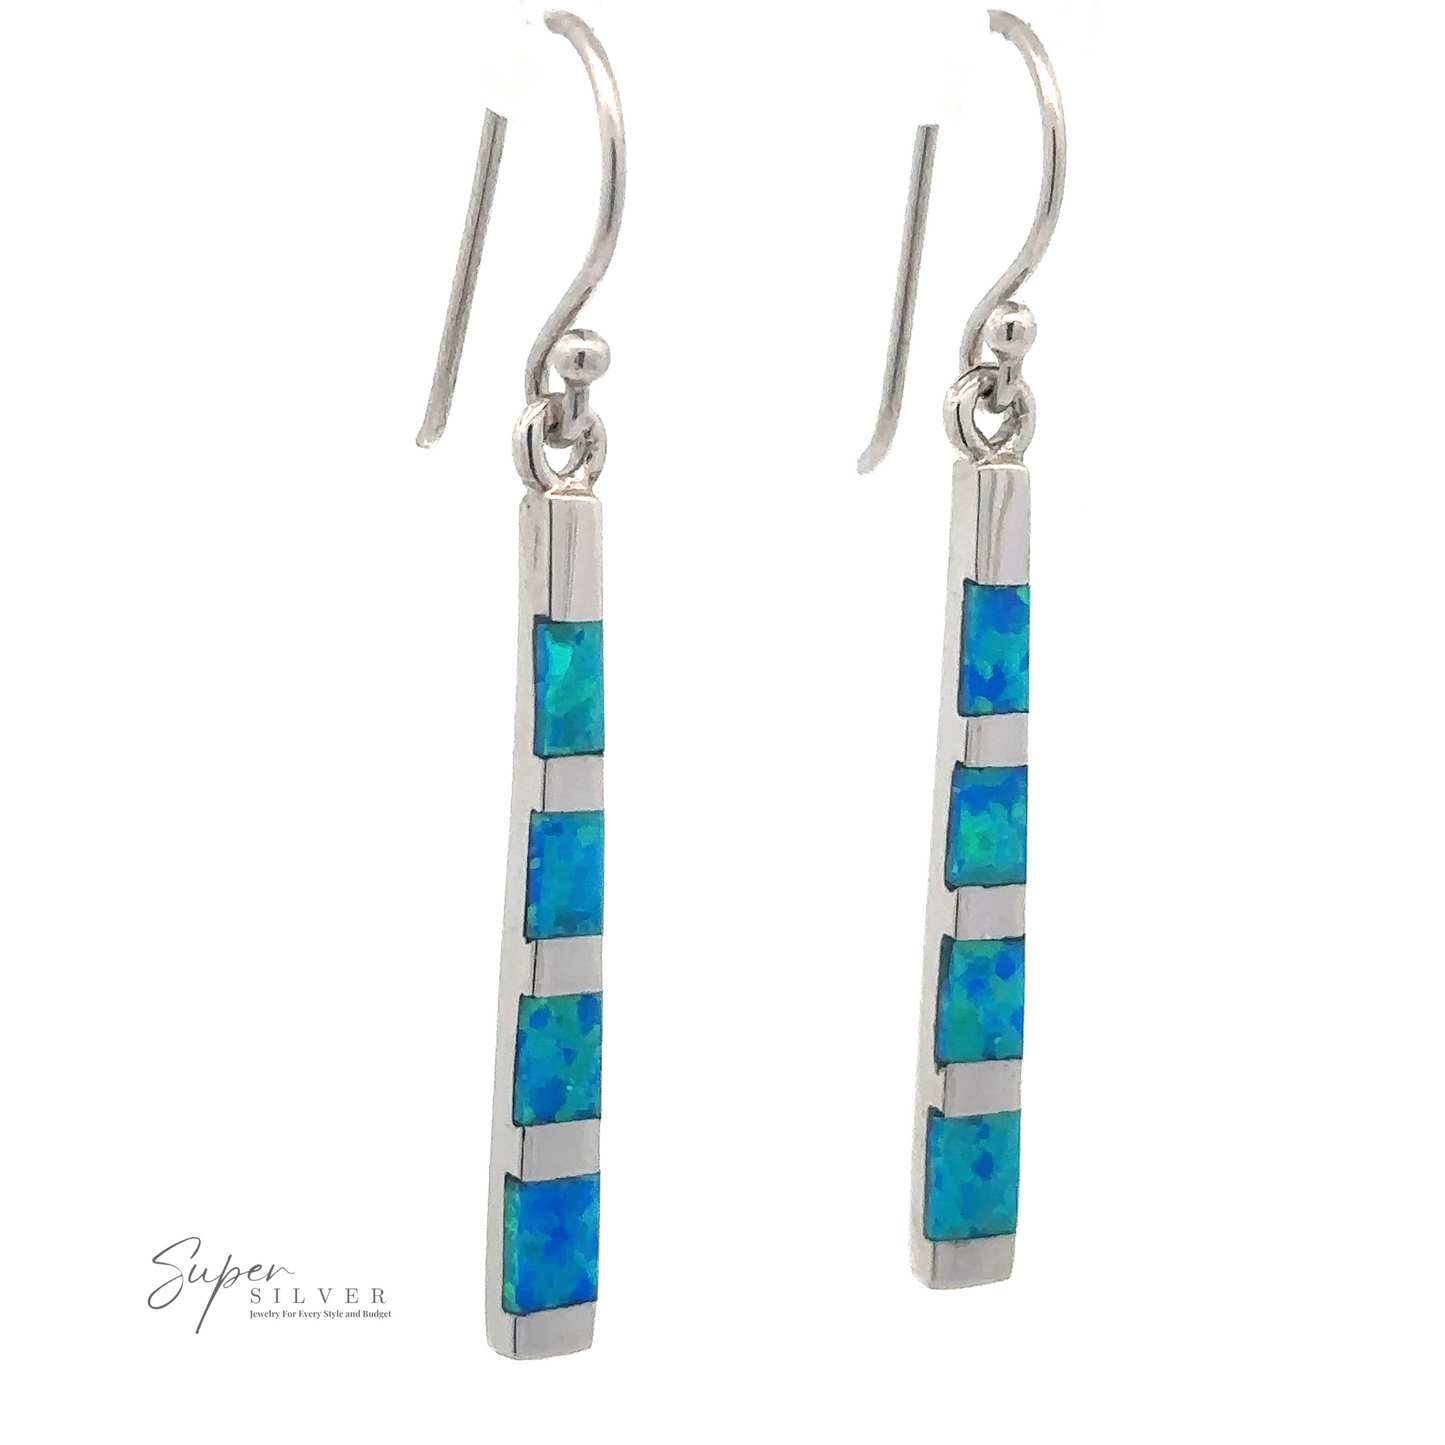 A pair of Blue Created Opal Rectangle Earrings with four rectangular blue-green stones, resembling stunning blue created opal, arranged vertically. The rectangle earrings feature hook clasps and are crafted from rhodium-plated sterling silver. The brand "Super Silver" is visible in the bottom left corner.